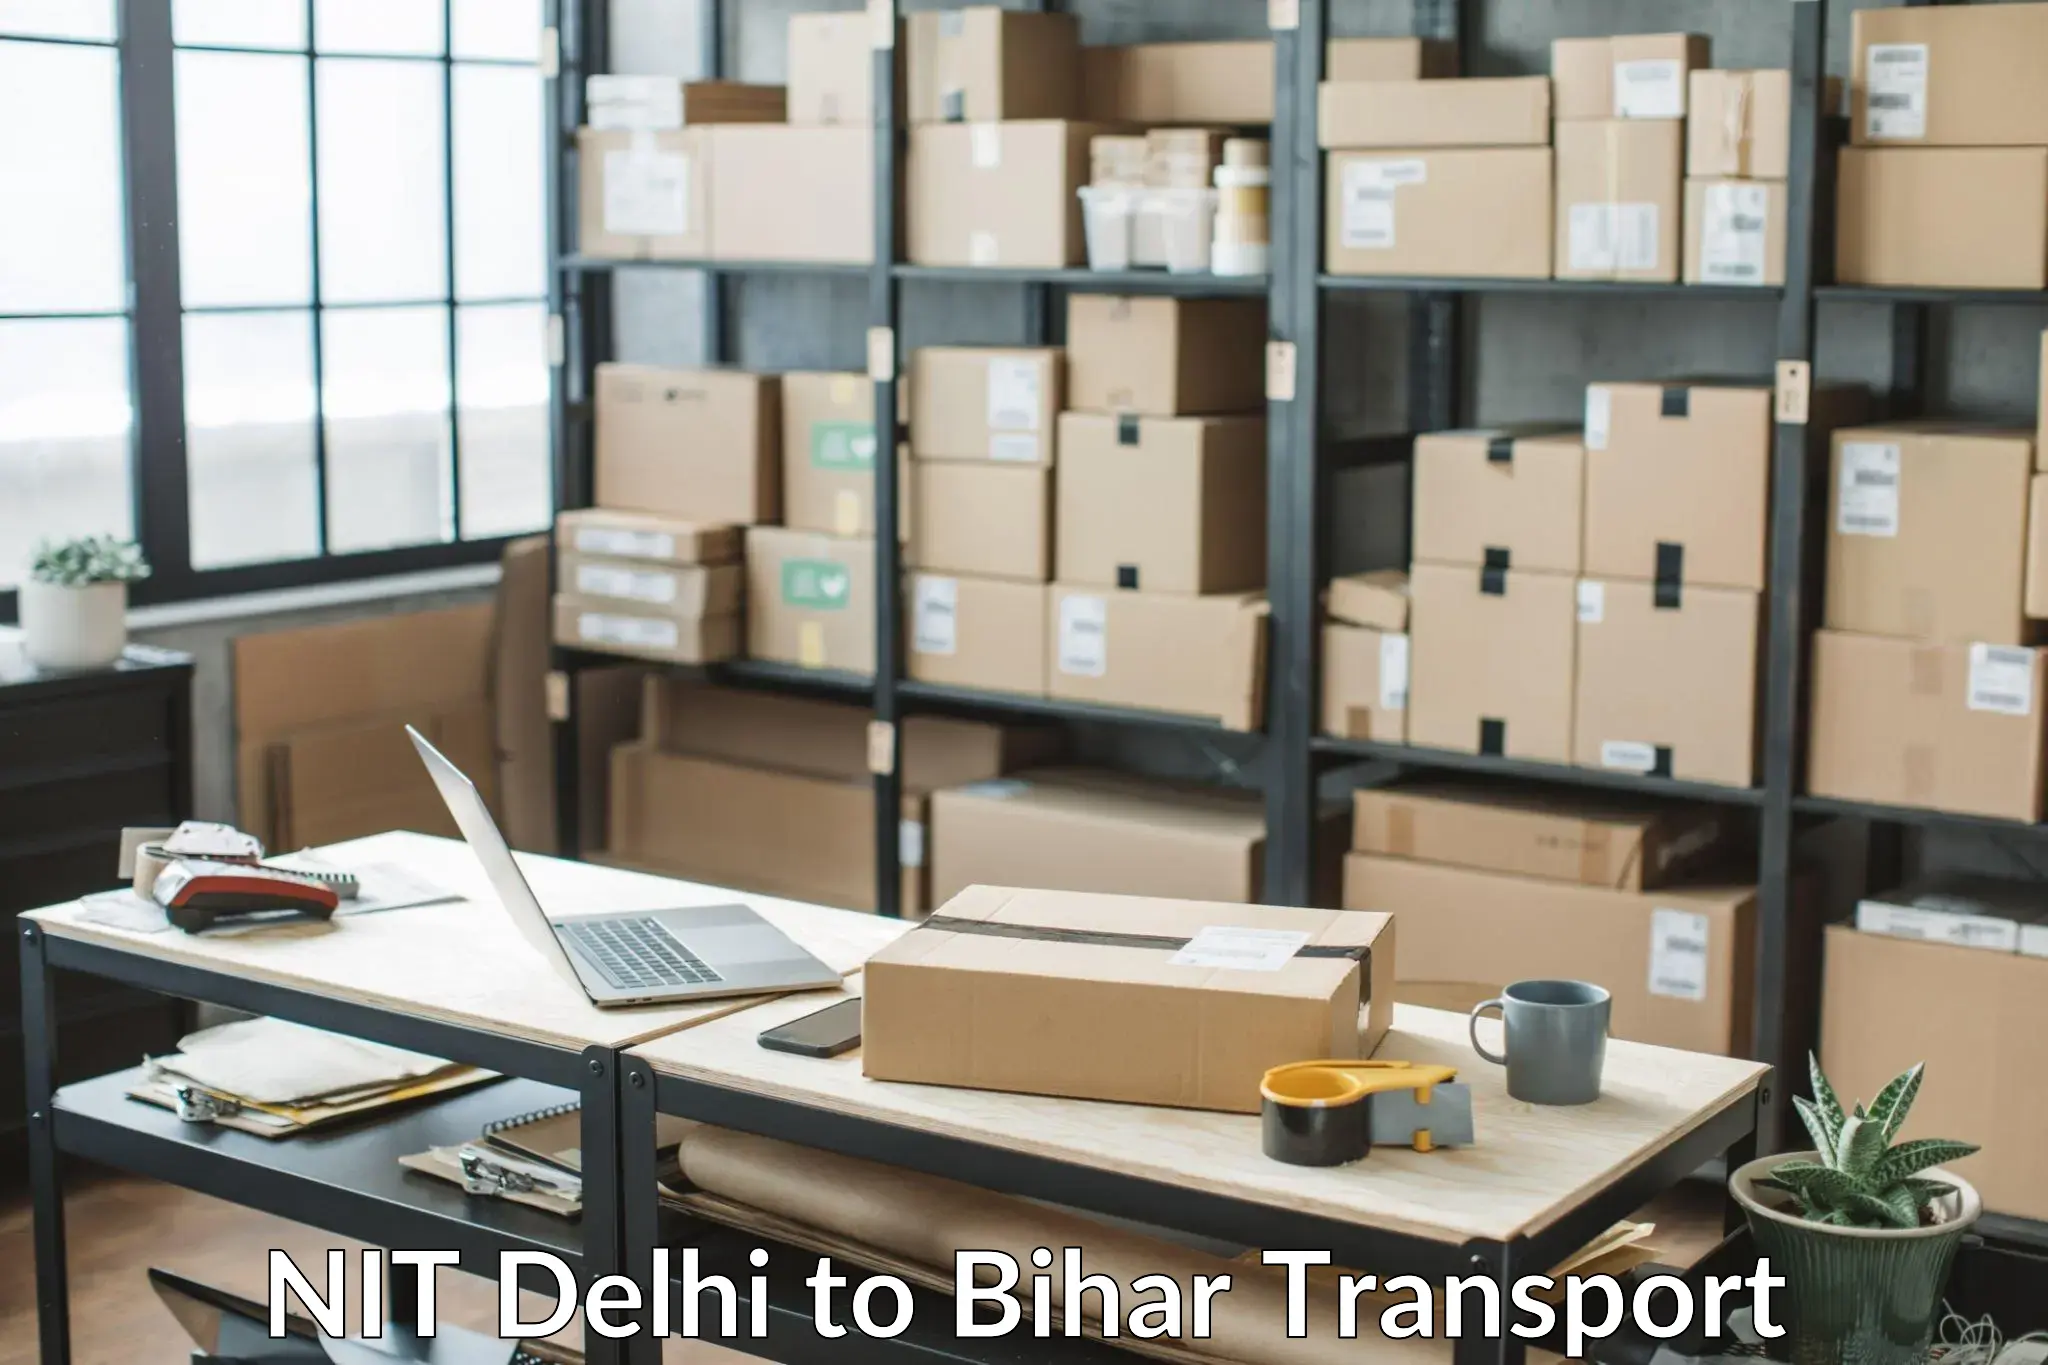 Express transport services in NIT Delhi to Bettiah